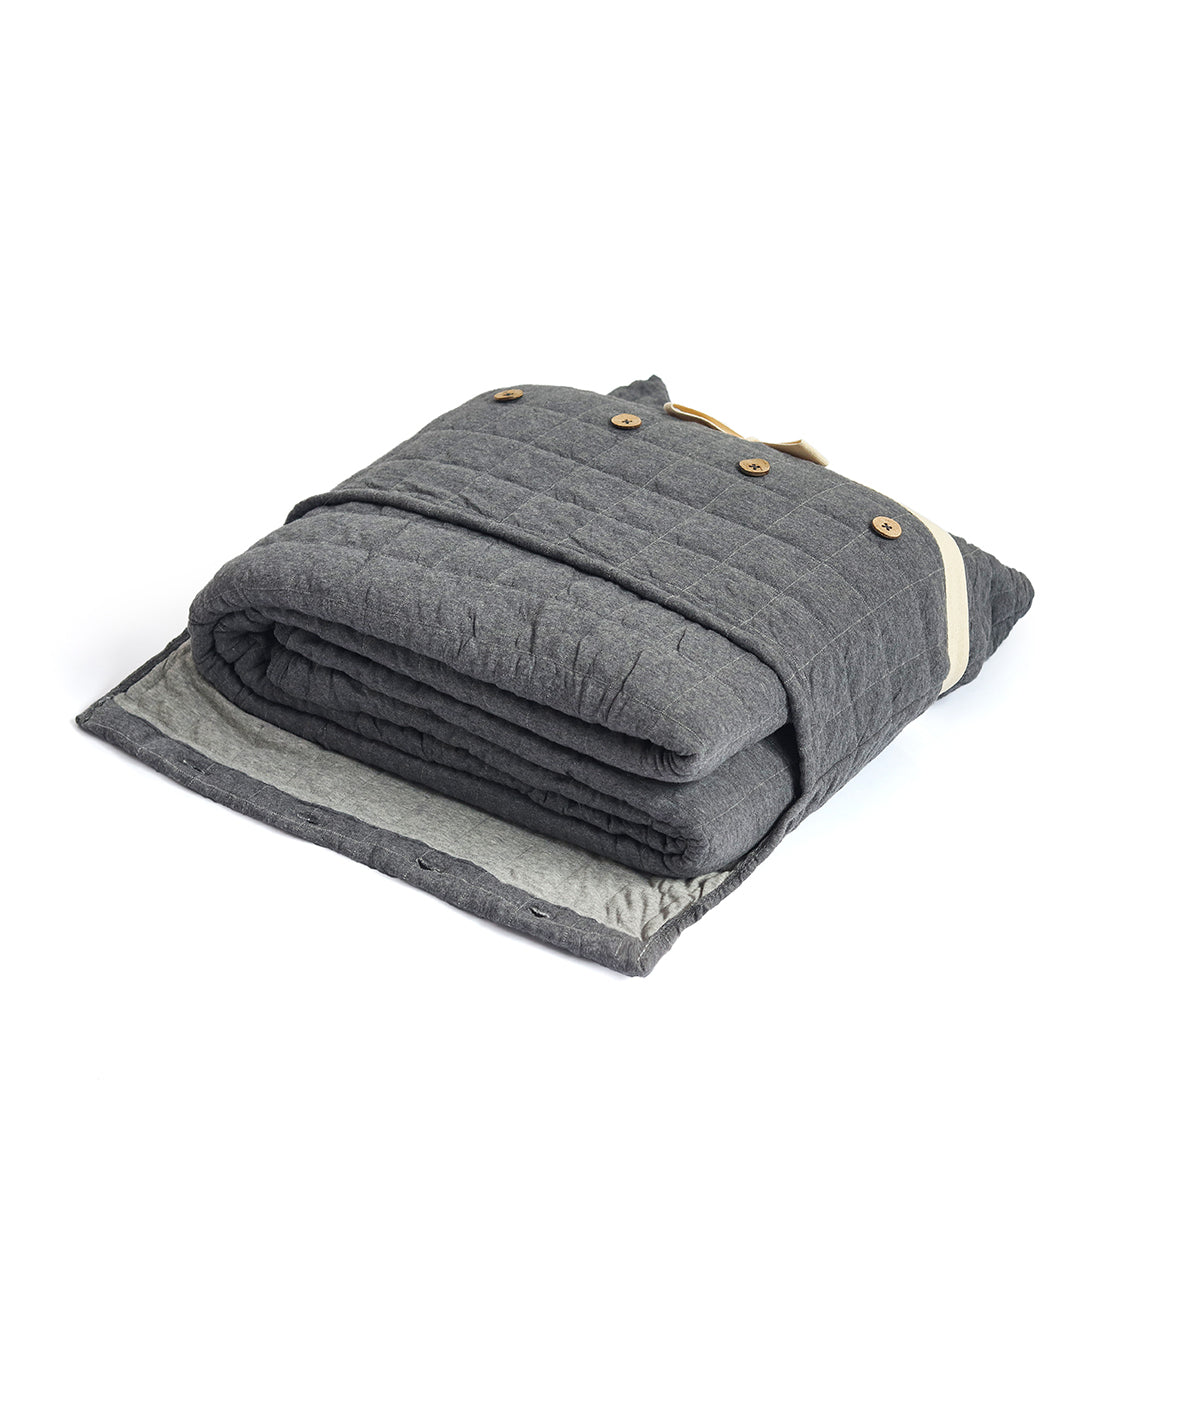 Square Check Cotton Knitted Light weight Quilted Blanket (Dark Grey Melange)